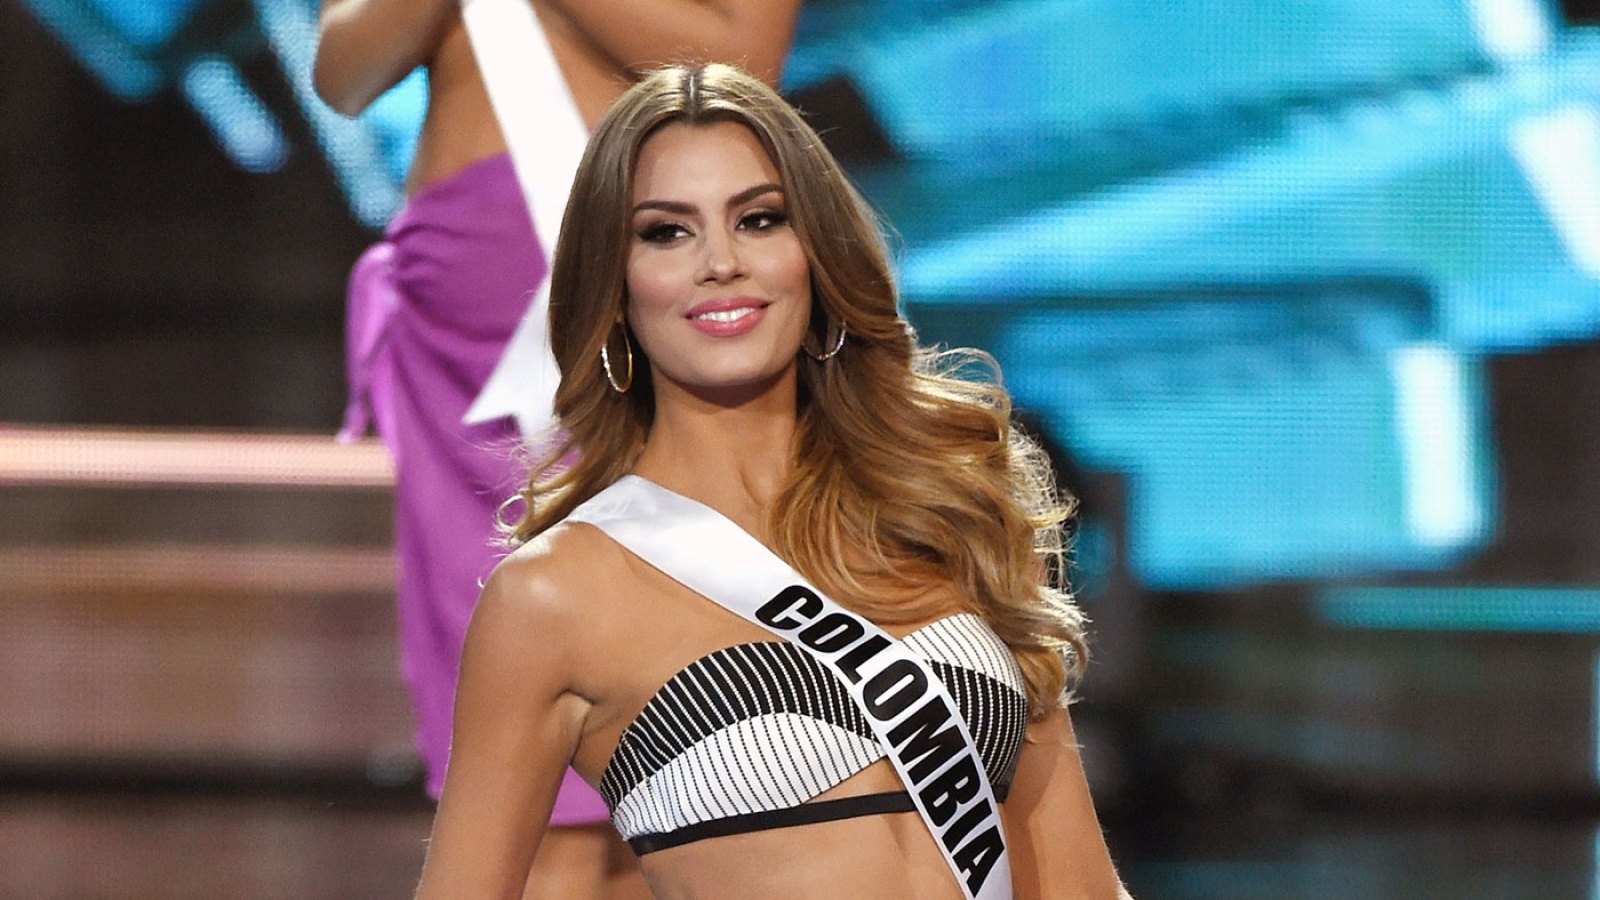 Miss Colombia has spoken out about the Miss Universe gaffe